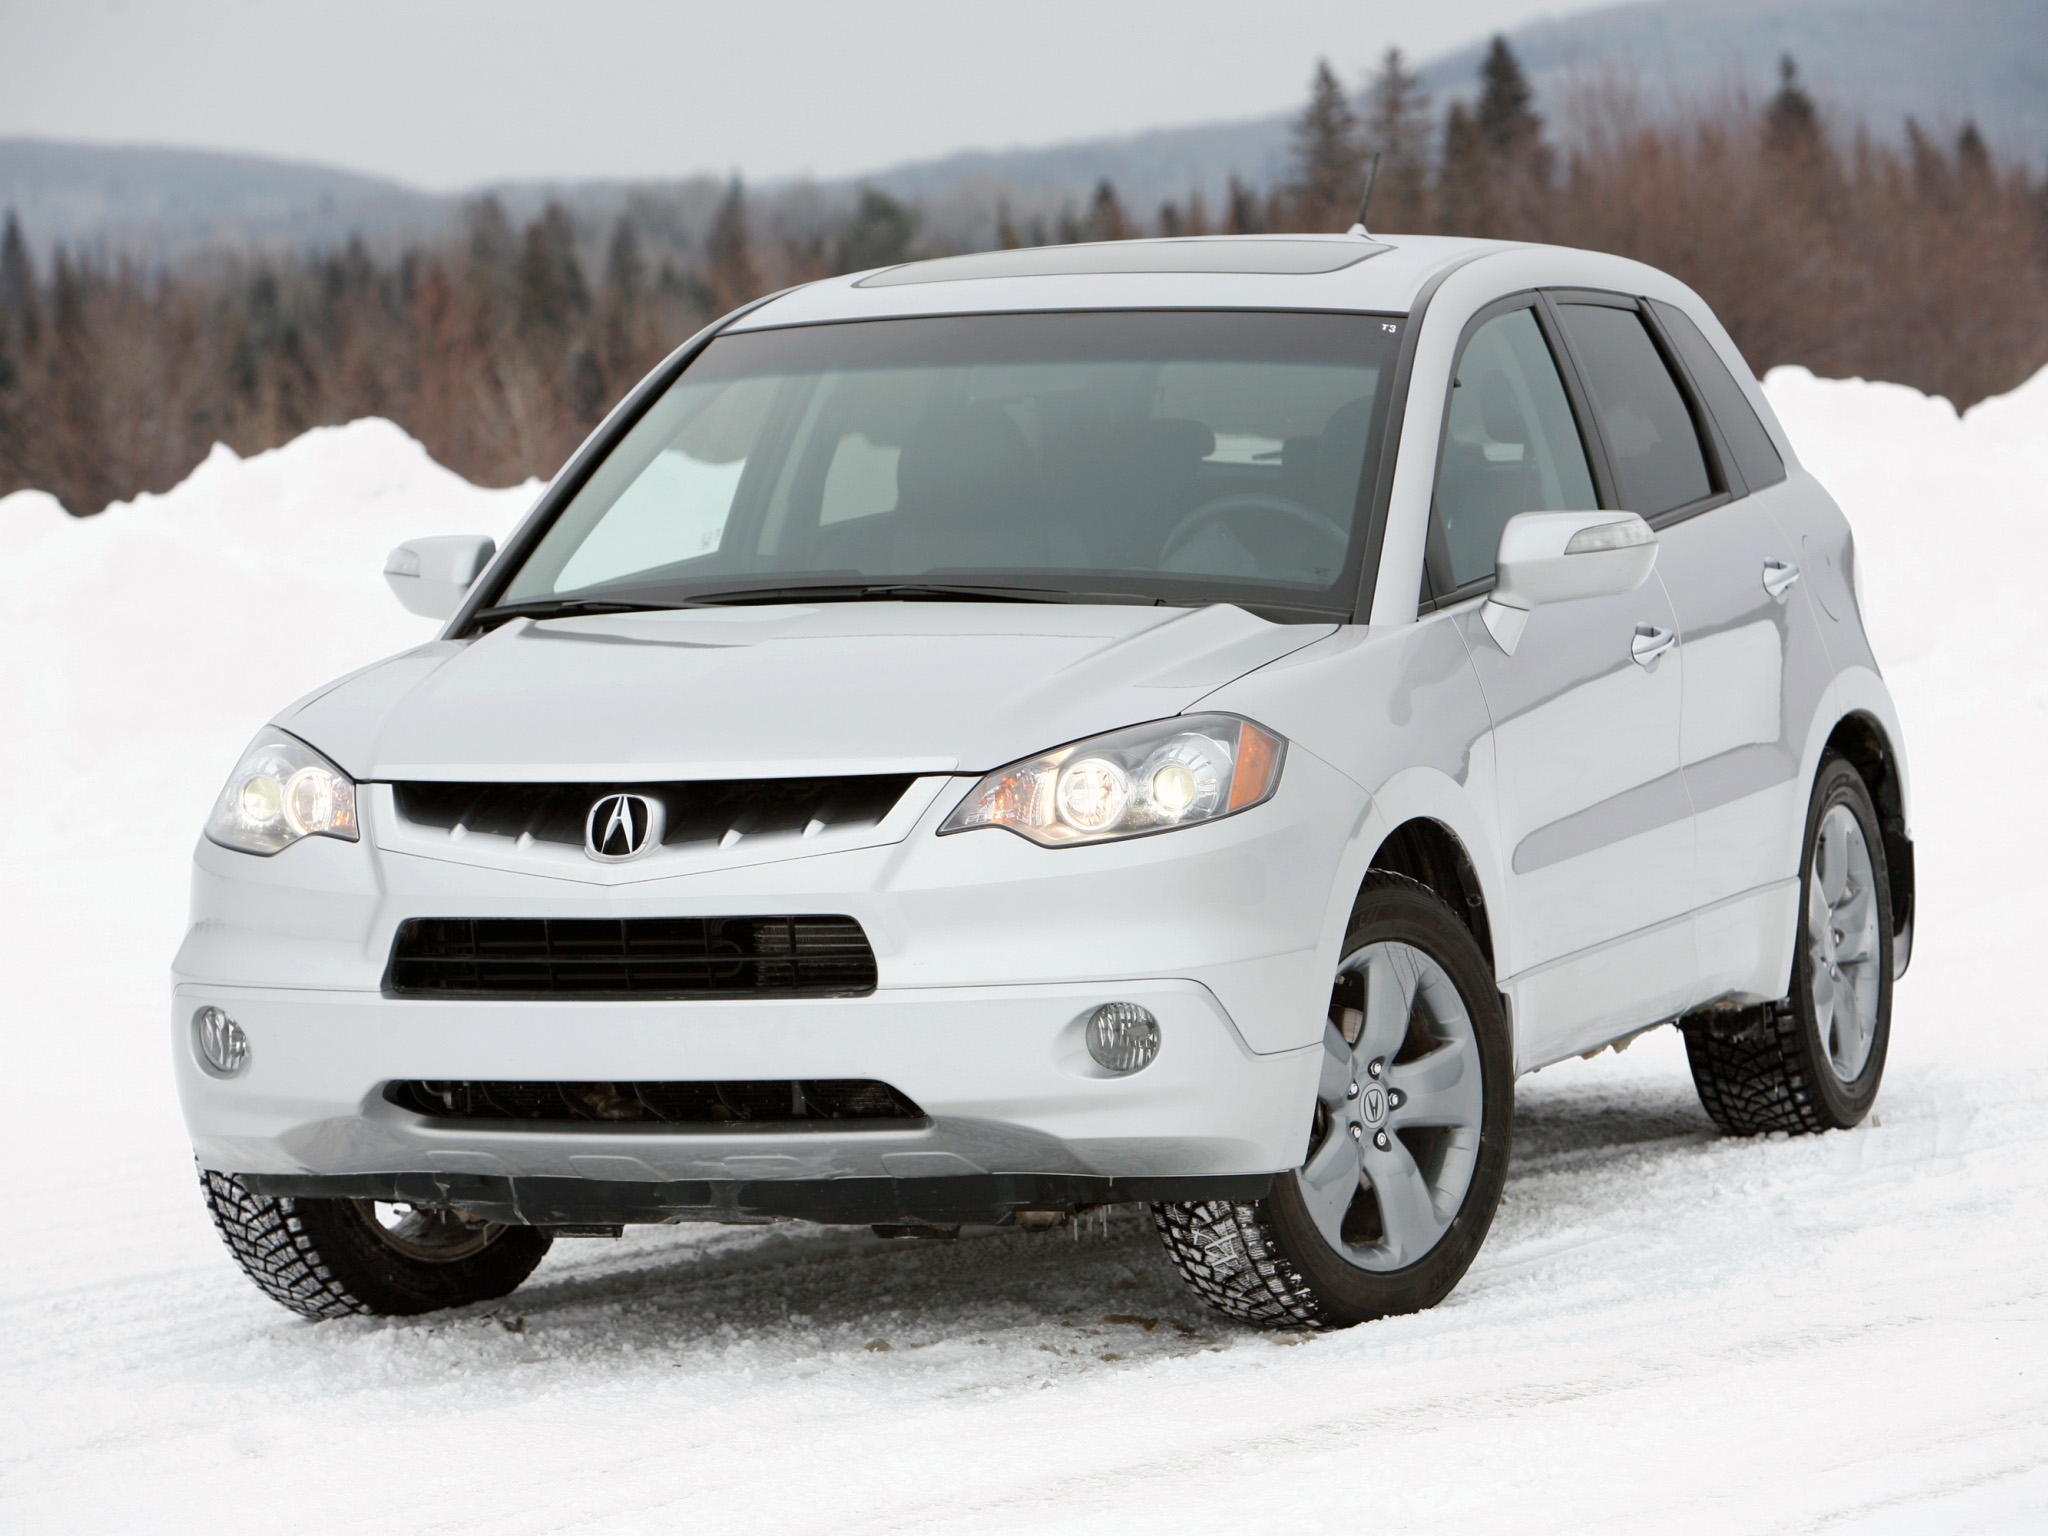 auto, acura, snow, cars, white, forest, jeep, front view, akura, rdx